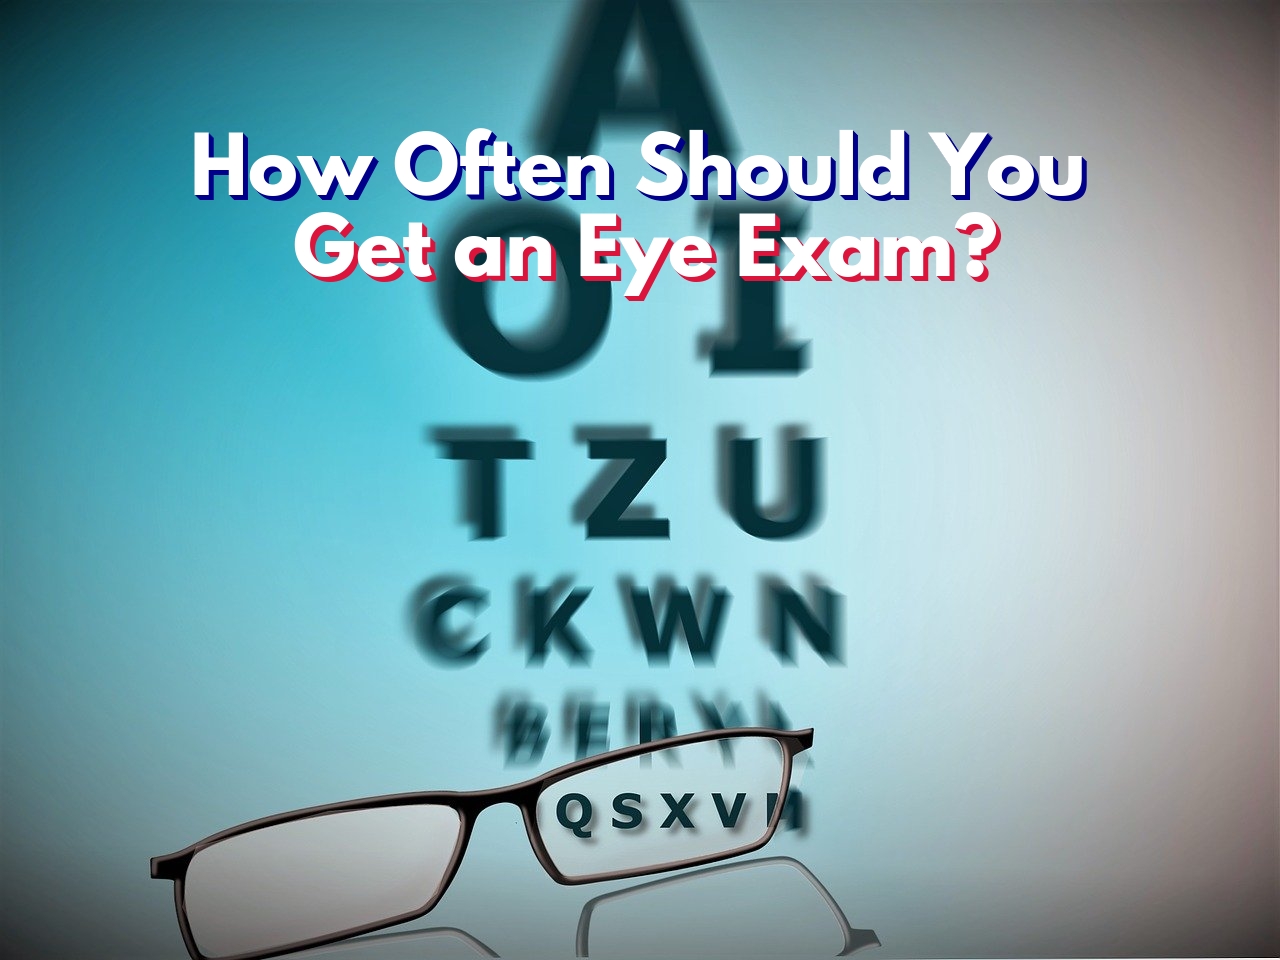 Eye exam showing letters becoming clearer